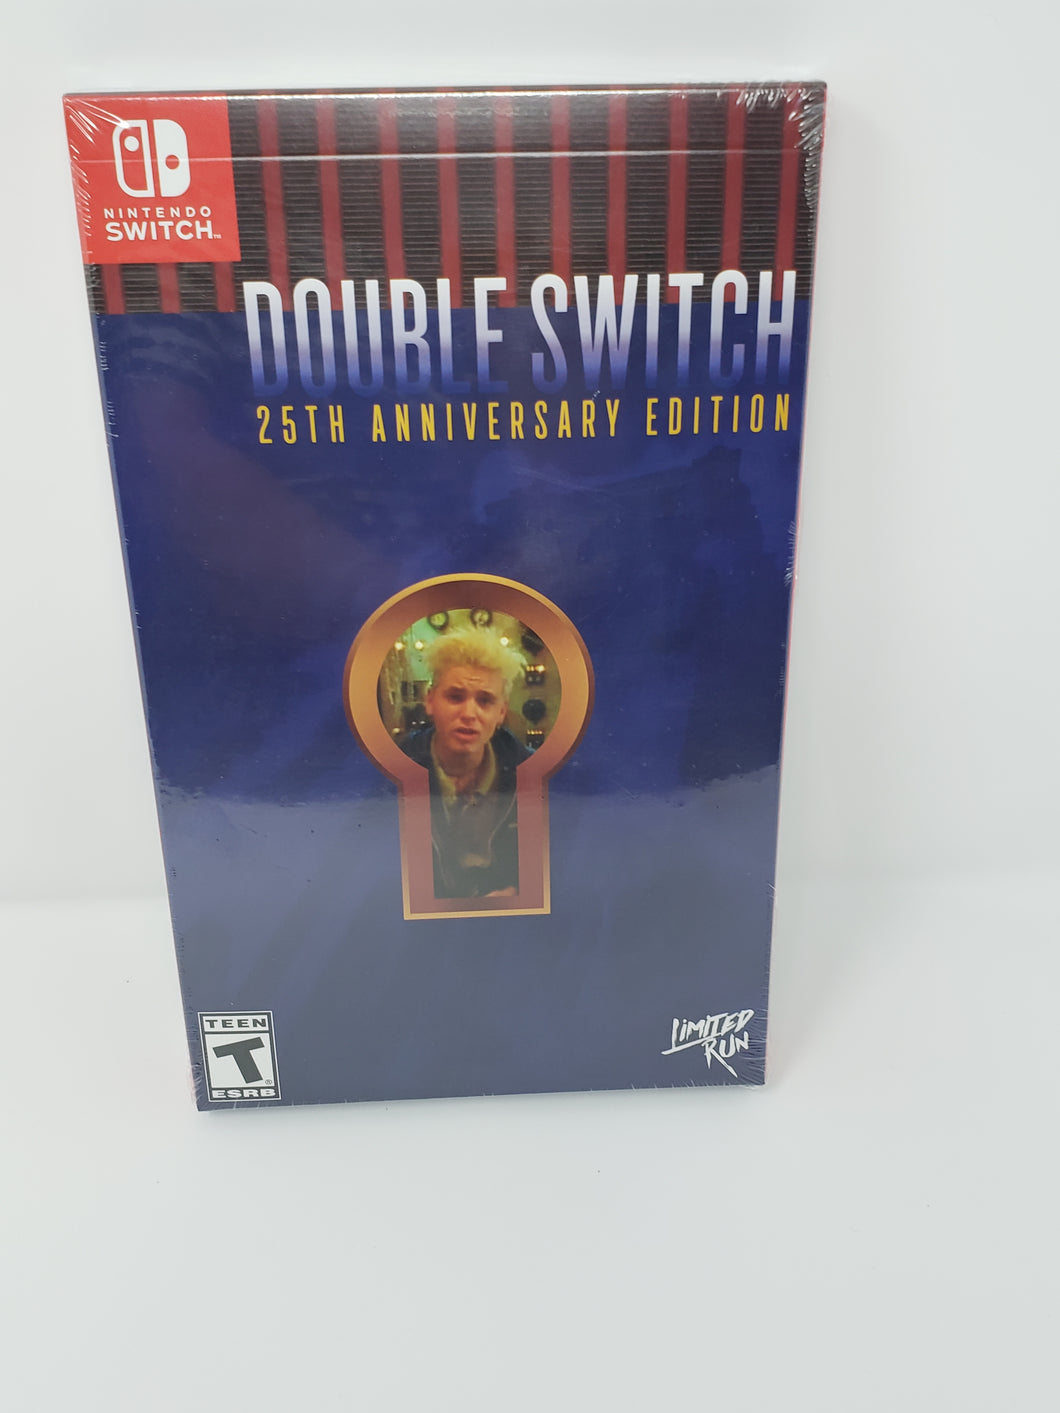 Double Switch 25th Anniversary Edition Collector's Edition LRG [new] - Nintendo Switch